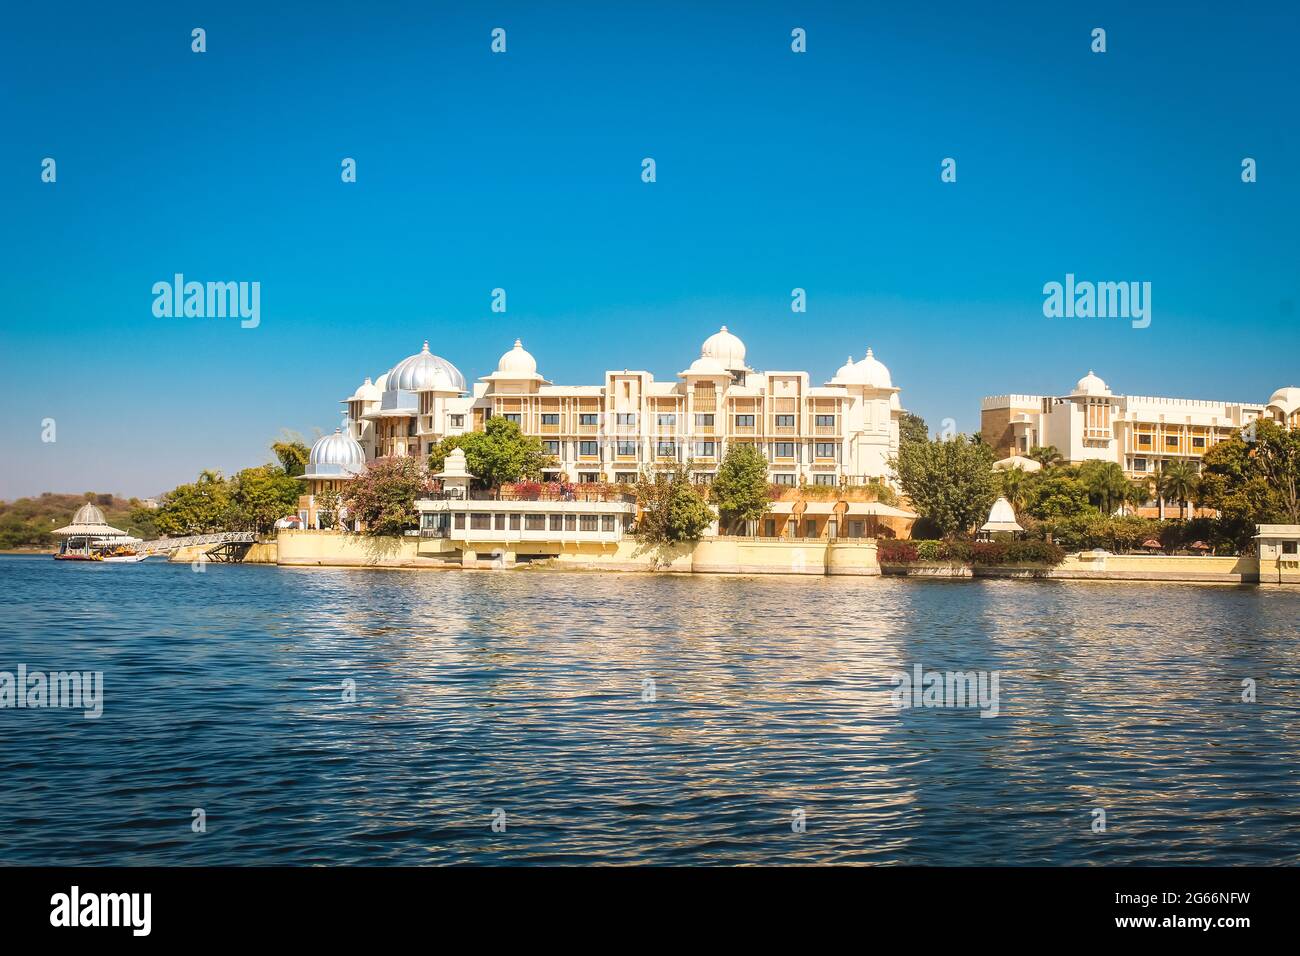 Udaipur City View Stock Photo